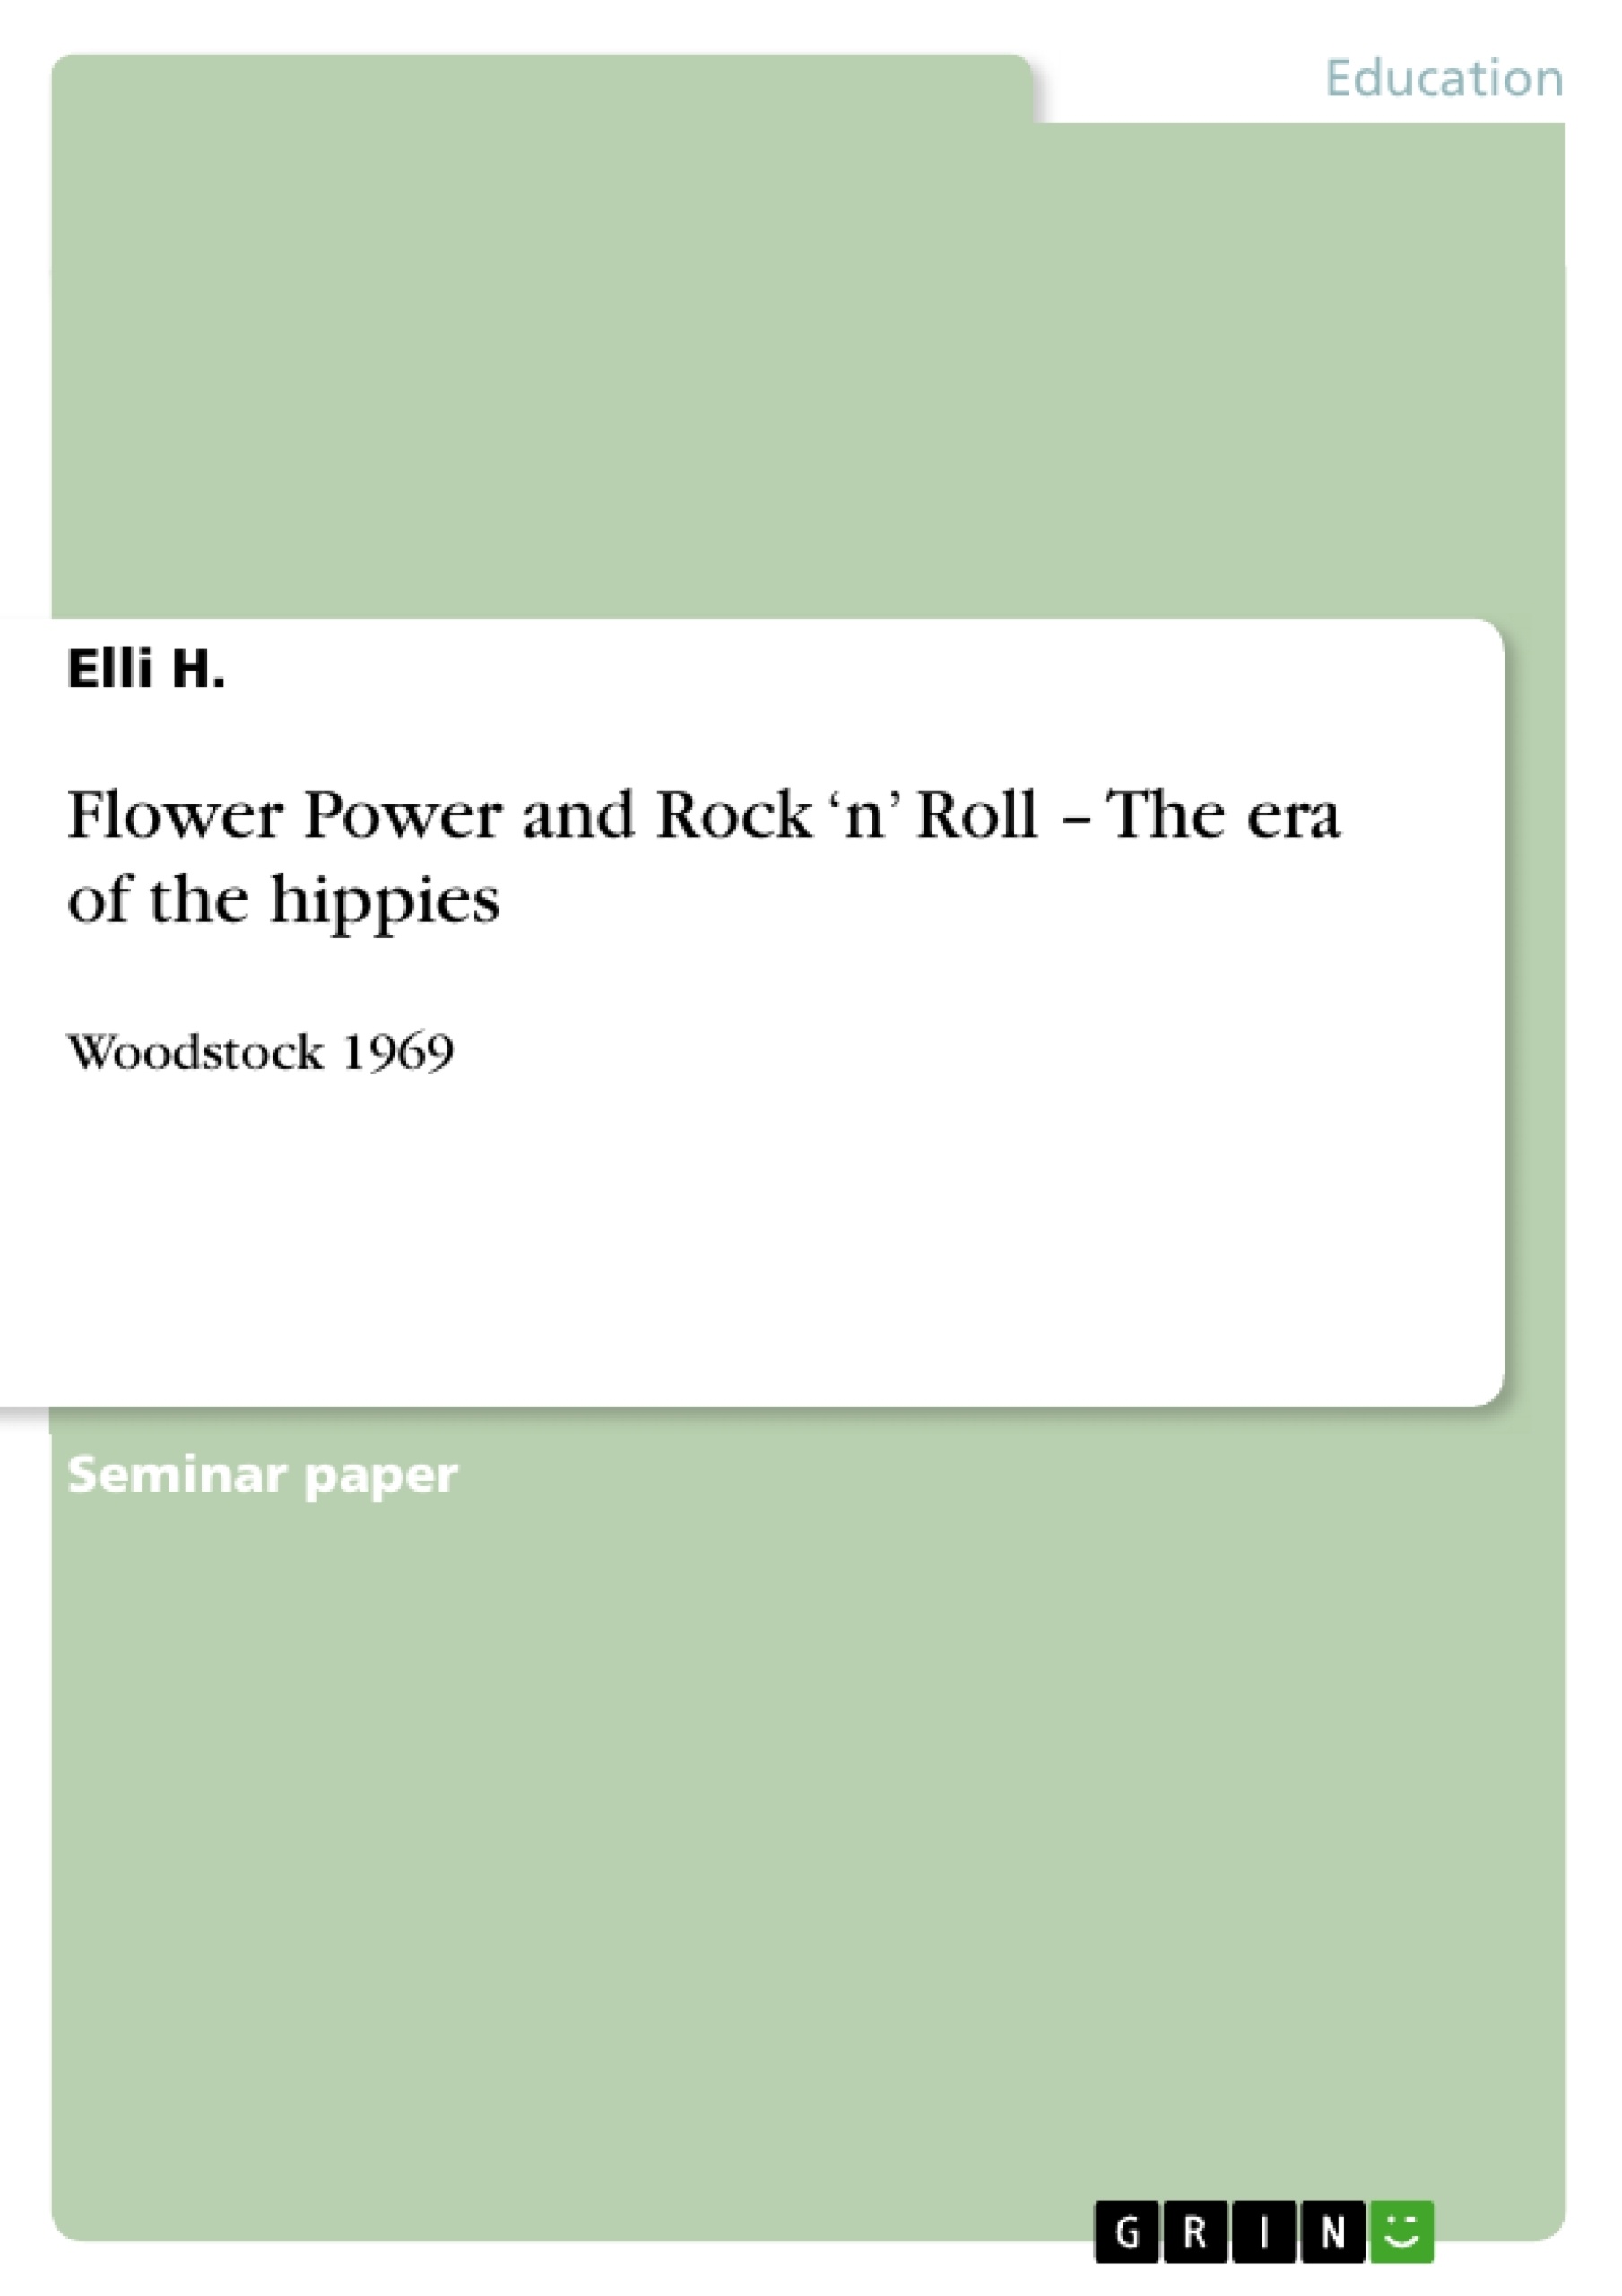 Título: Flower Power and Rock ‘n’ Roll – The era of the hippies